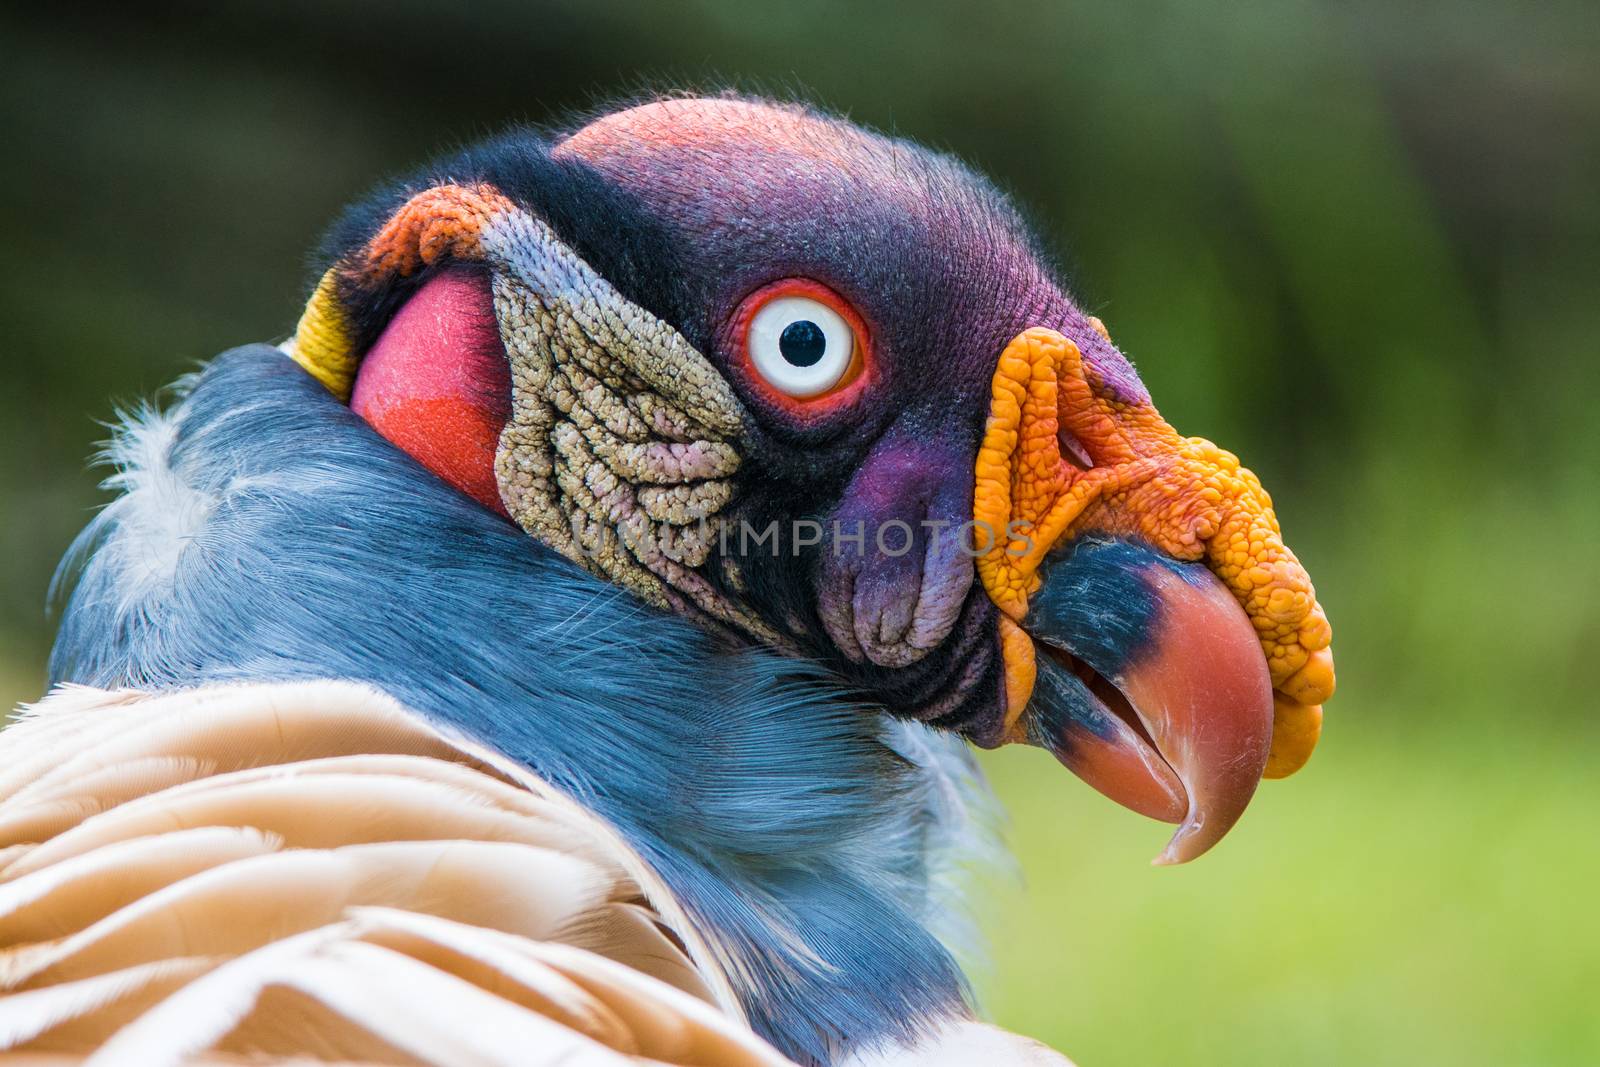 Closeup portrait of a King vulture also known as Sarcoramphus papa.